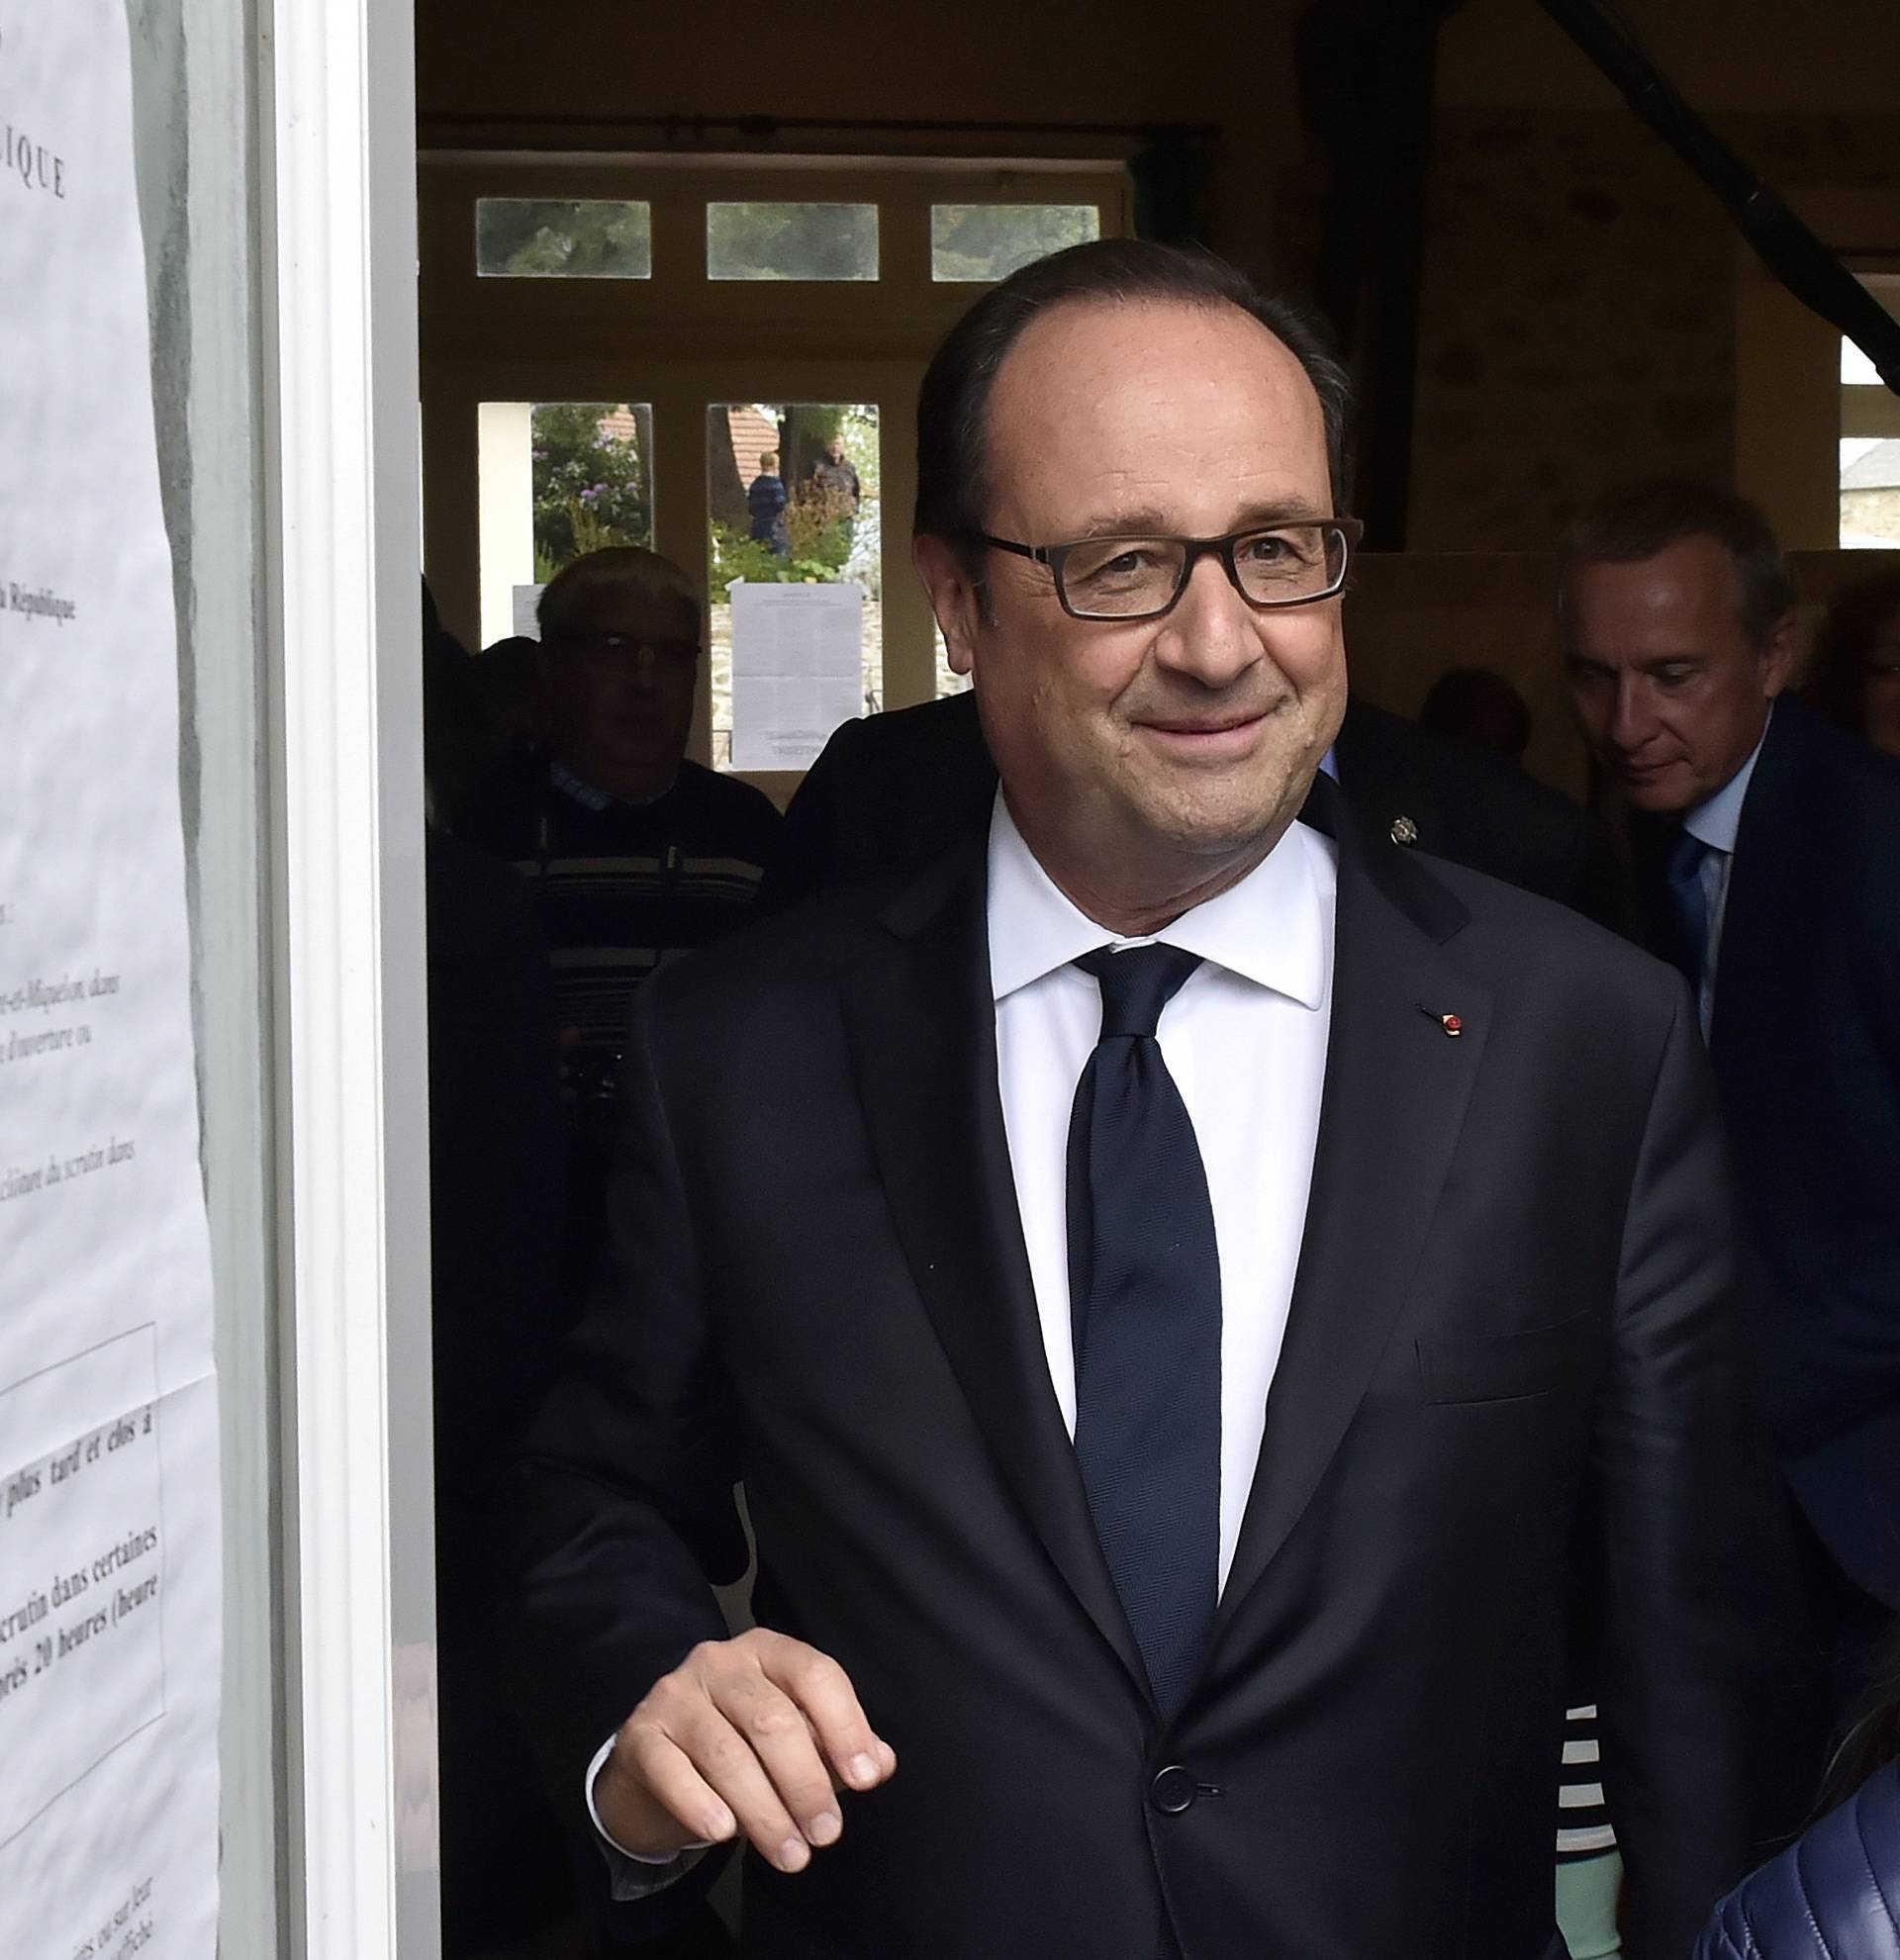 French President Francois Hollande leaves after visiting a polling station in the second round of the 2017 French presidential election, in the village of Saint Mexant